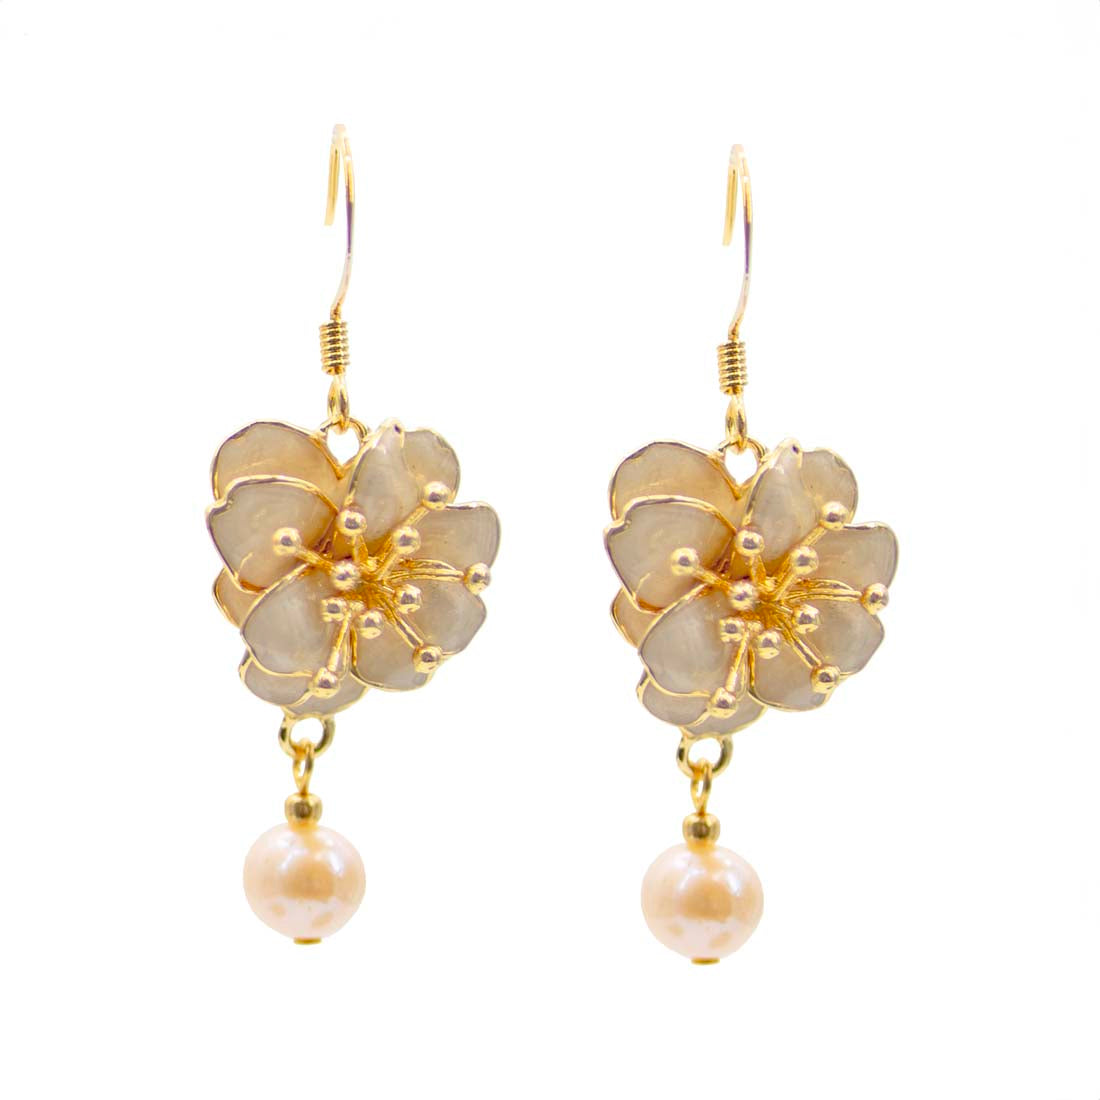 Cherry Blossom and Blush Pearl Earrings